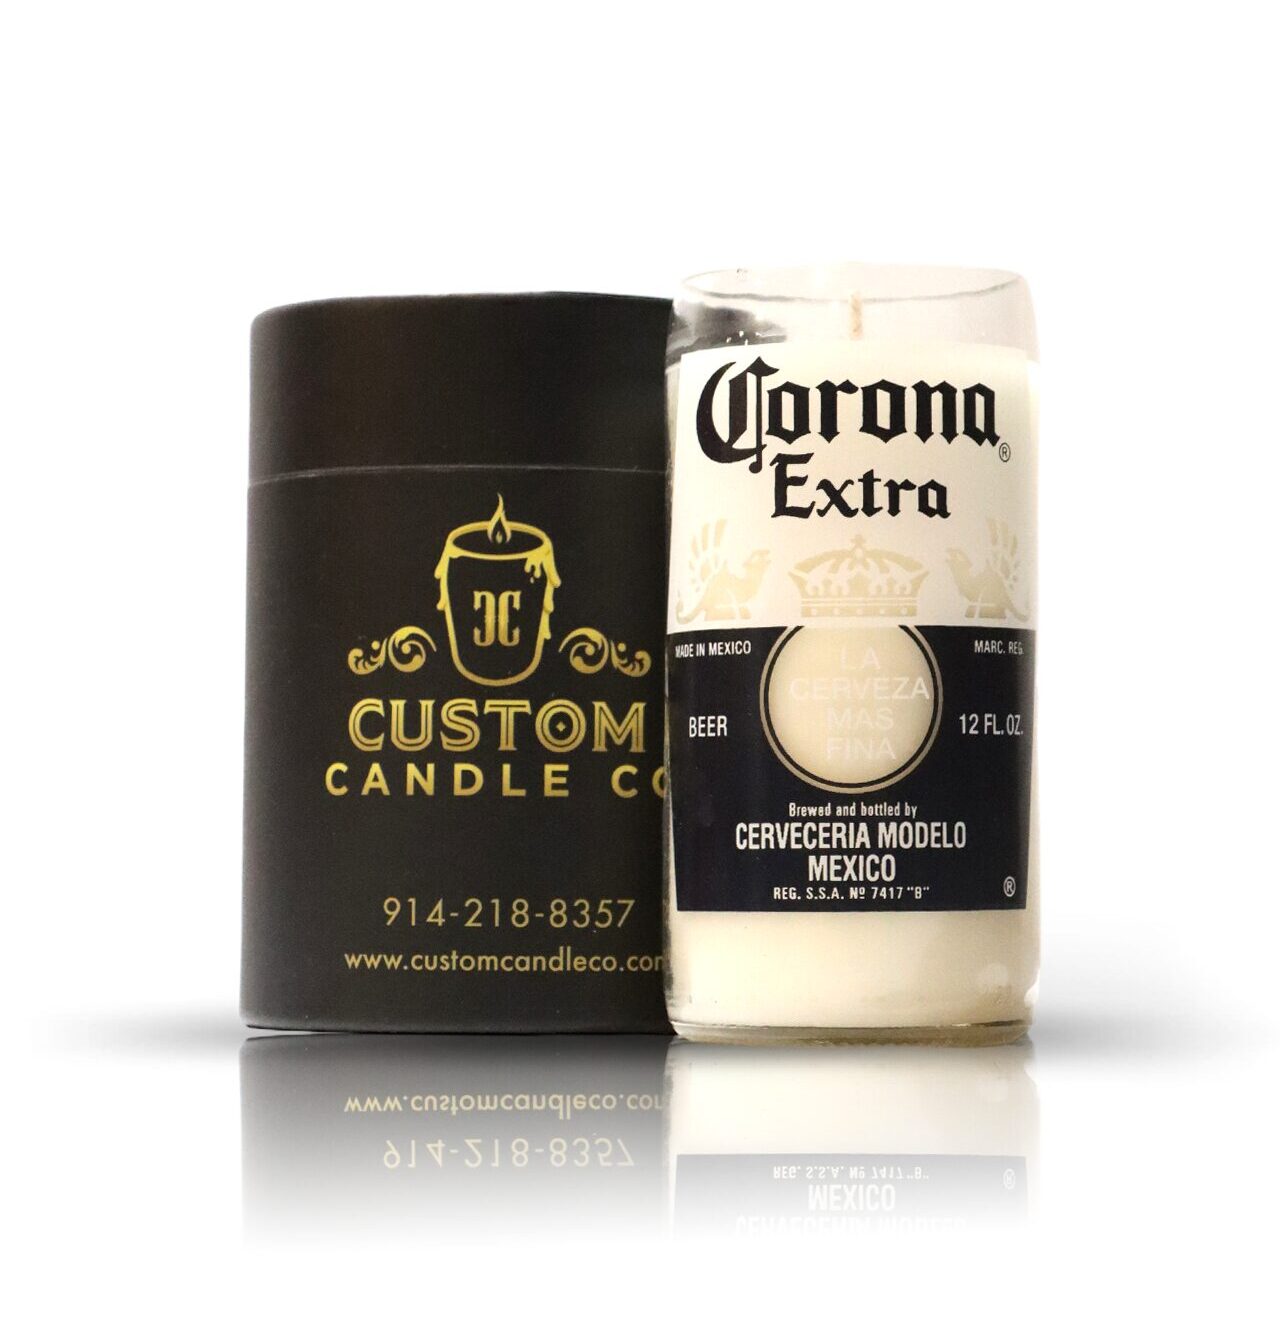 Introducing the Recycled Corona Extra Beer Candle by Corona Esquire Candle Co., a unique blend of luxury and relaxation. Experience the soothing ambiance of this exquisite candle, handcrafted with care by the experts.